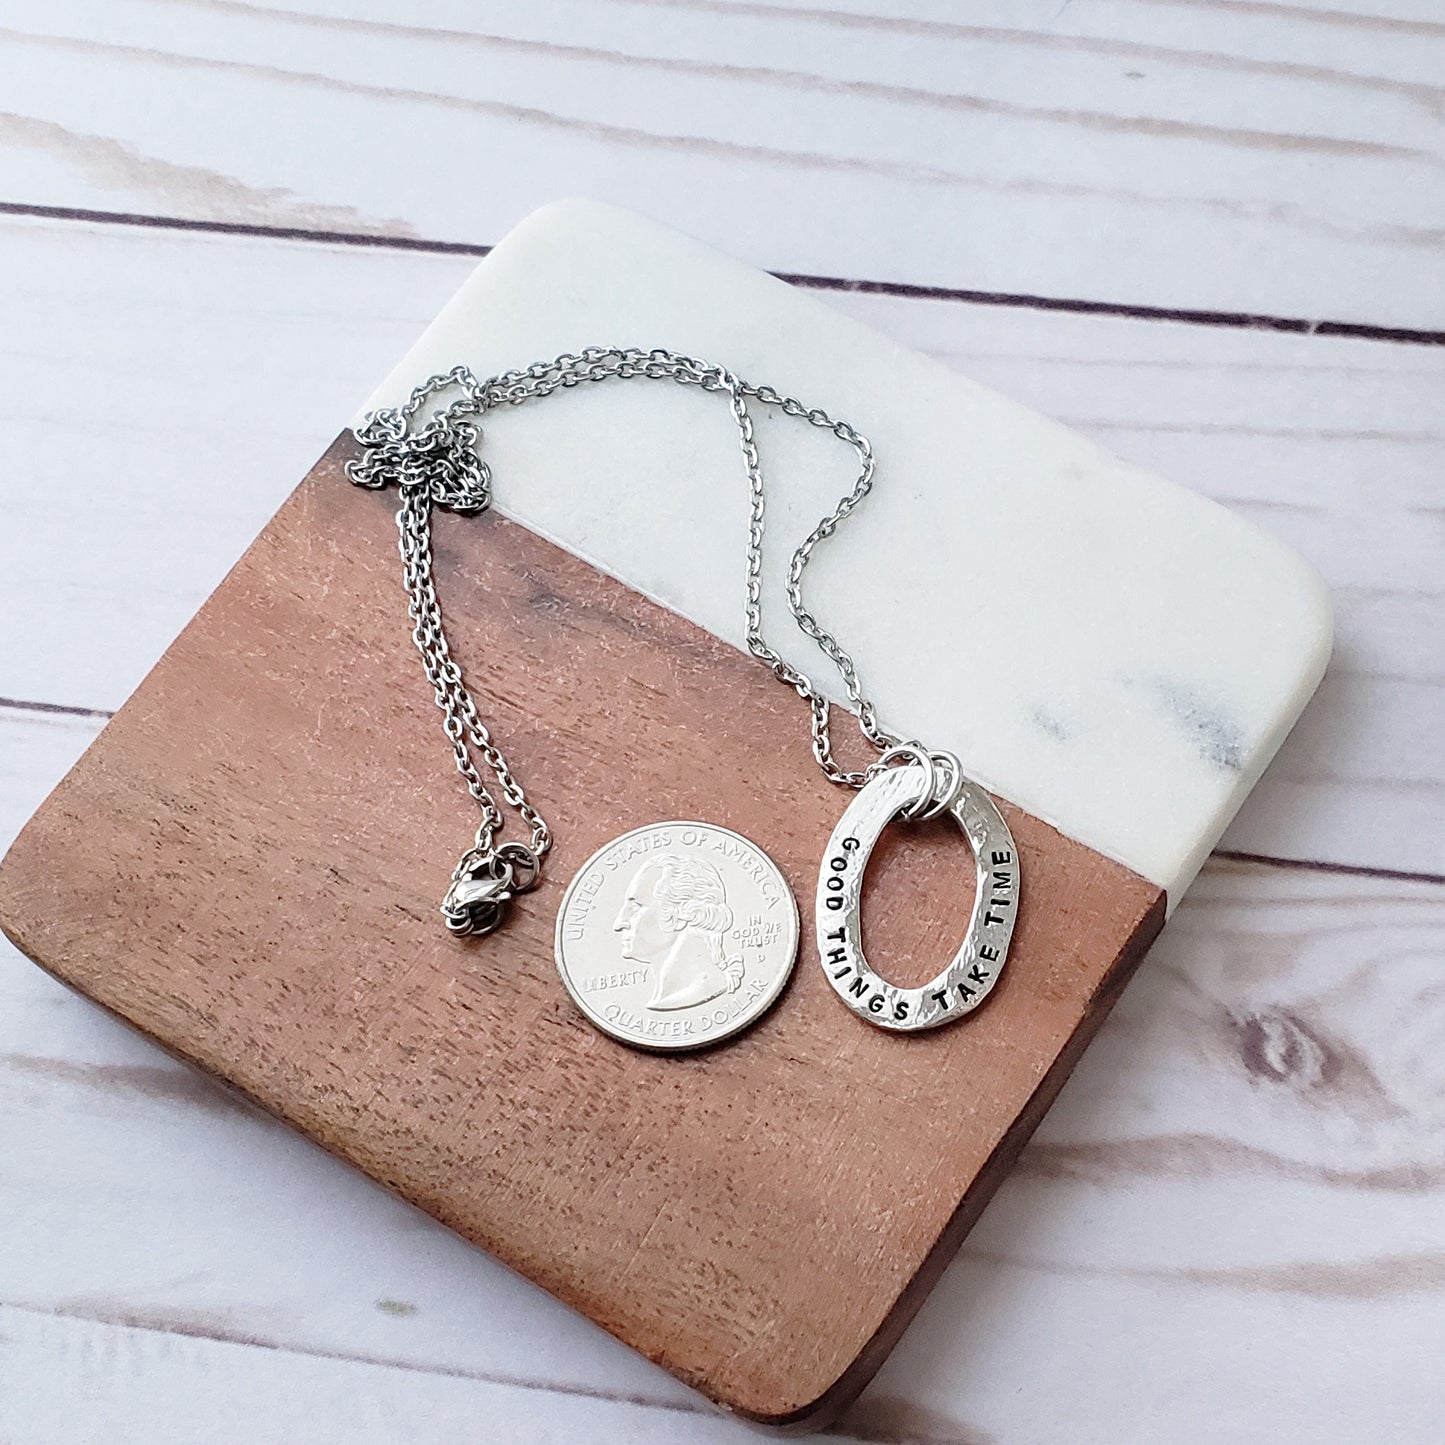 Good Things Take Time Pewter Washer Necklace